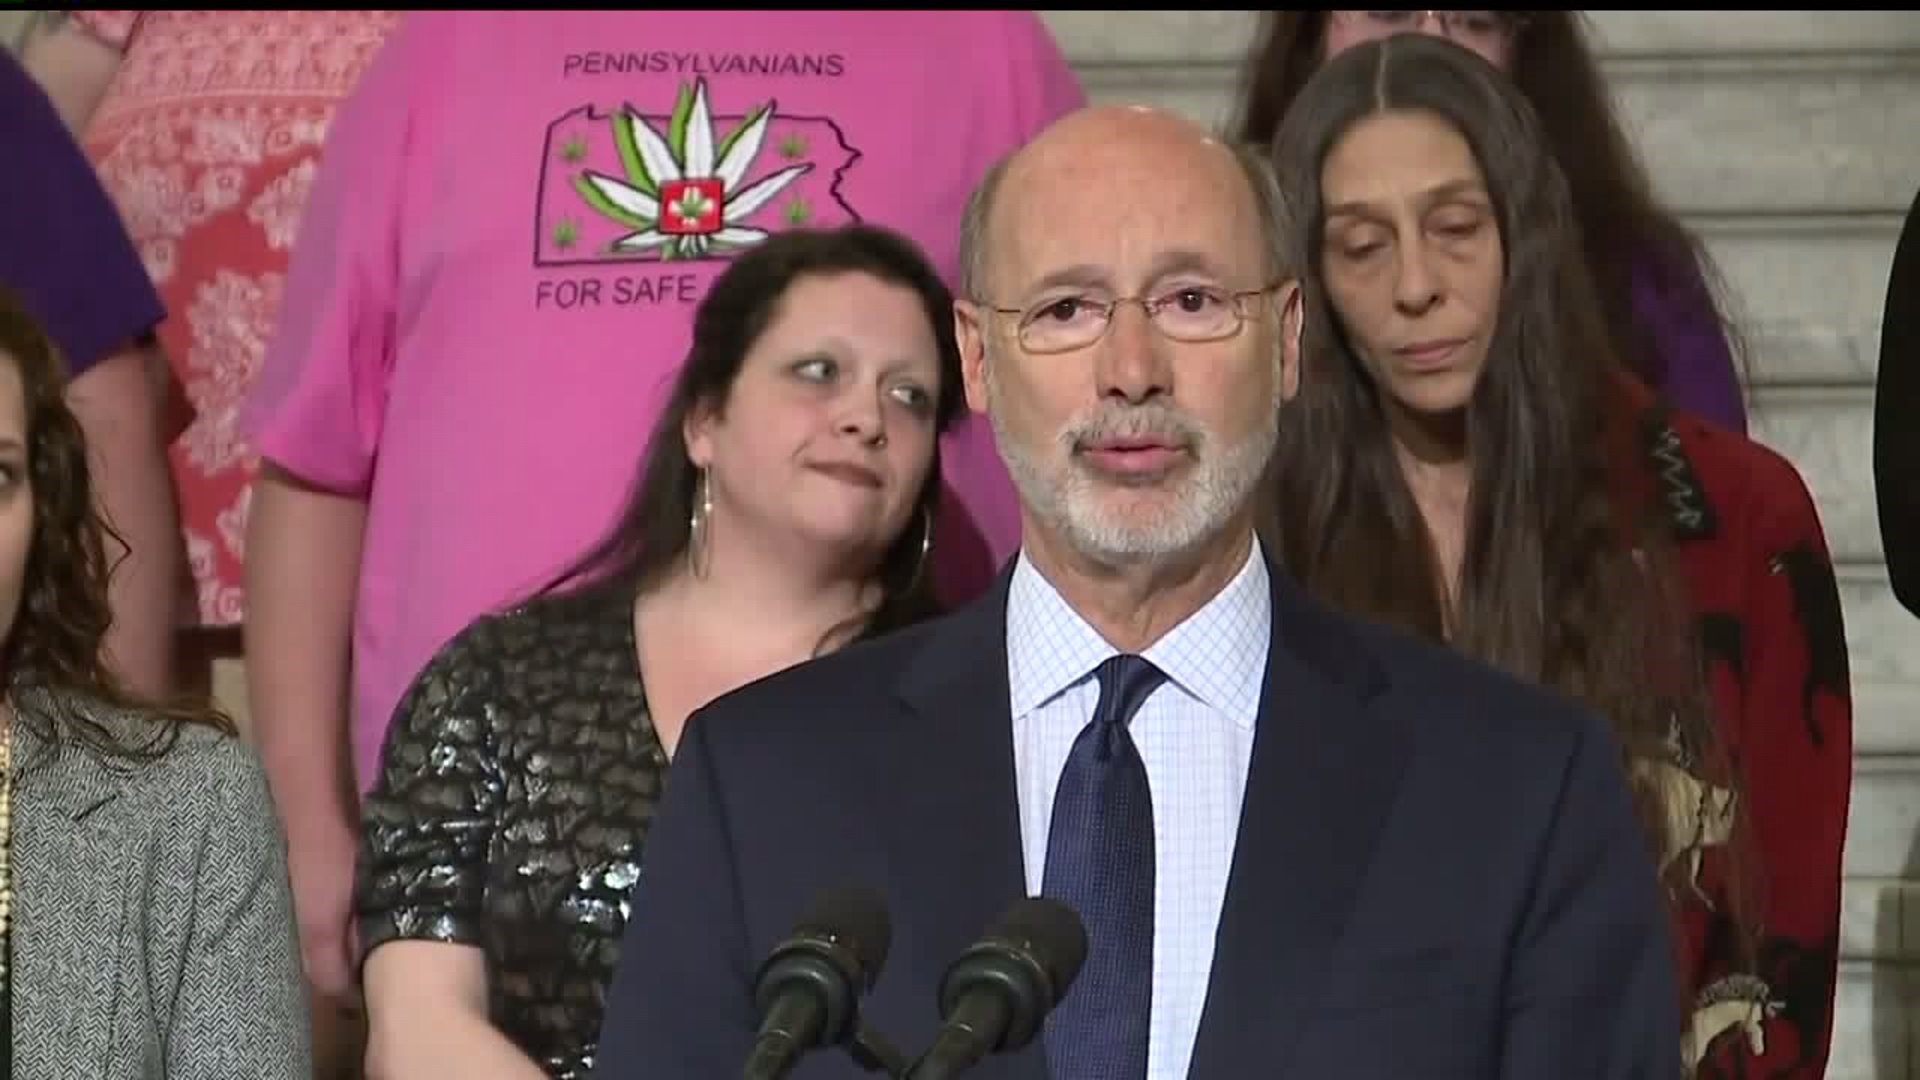 One year after medical marijuana legalization, advocates, Governor Wolf, "move forward"